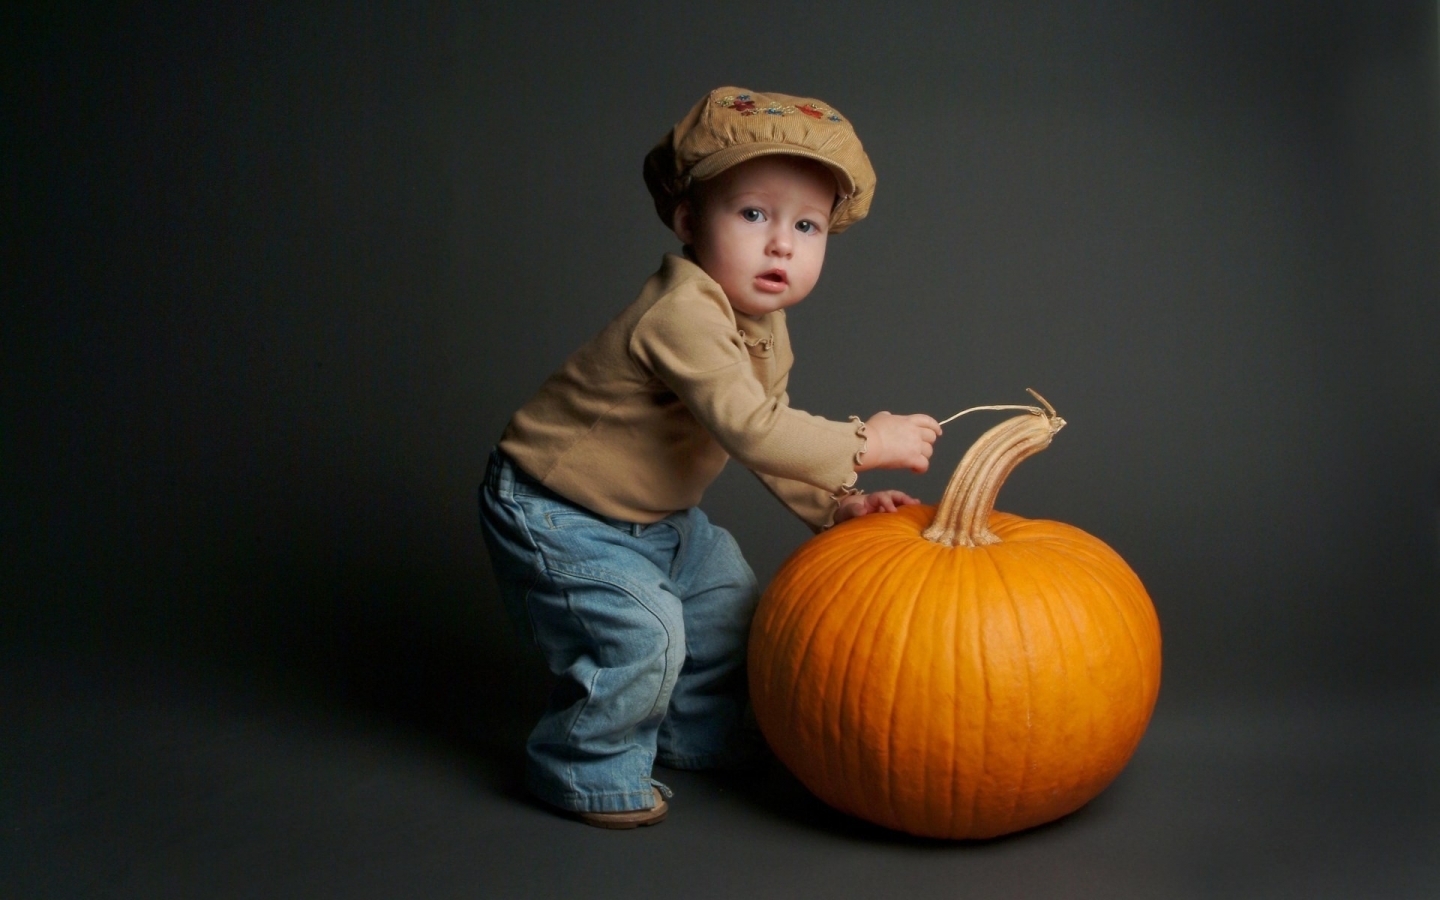 The Boy with Pumpkin for 1440 x 900 widescreen resolution